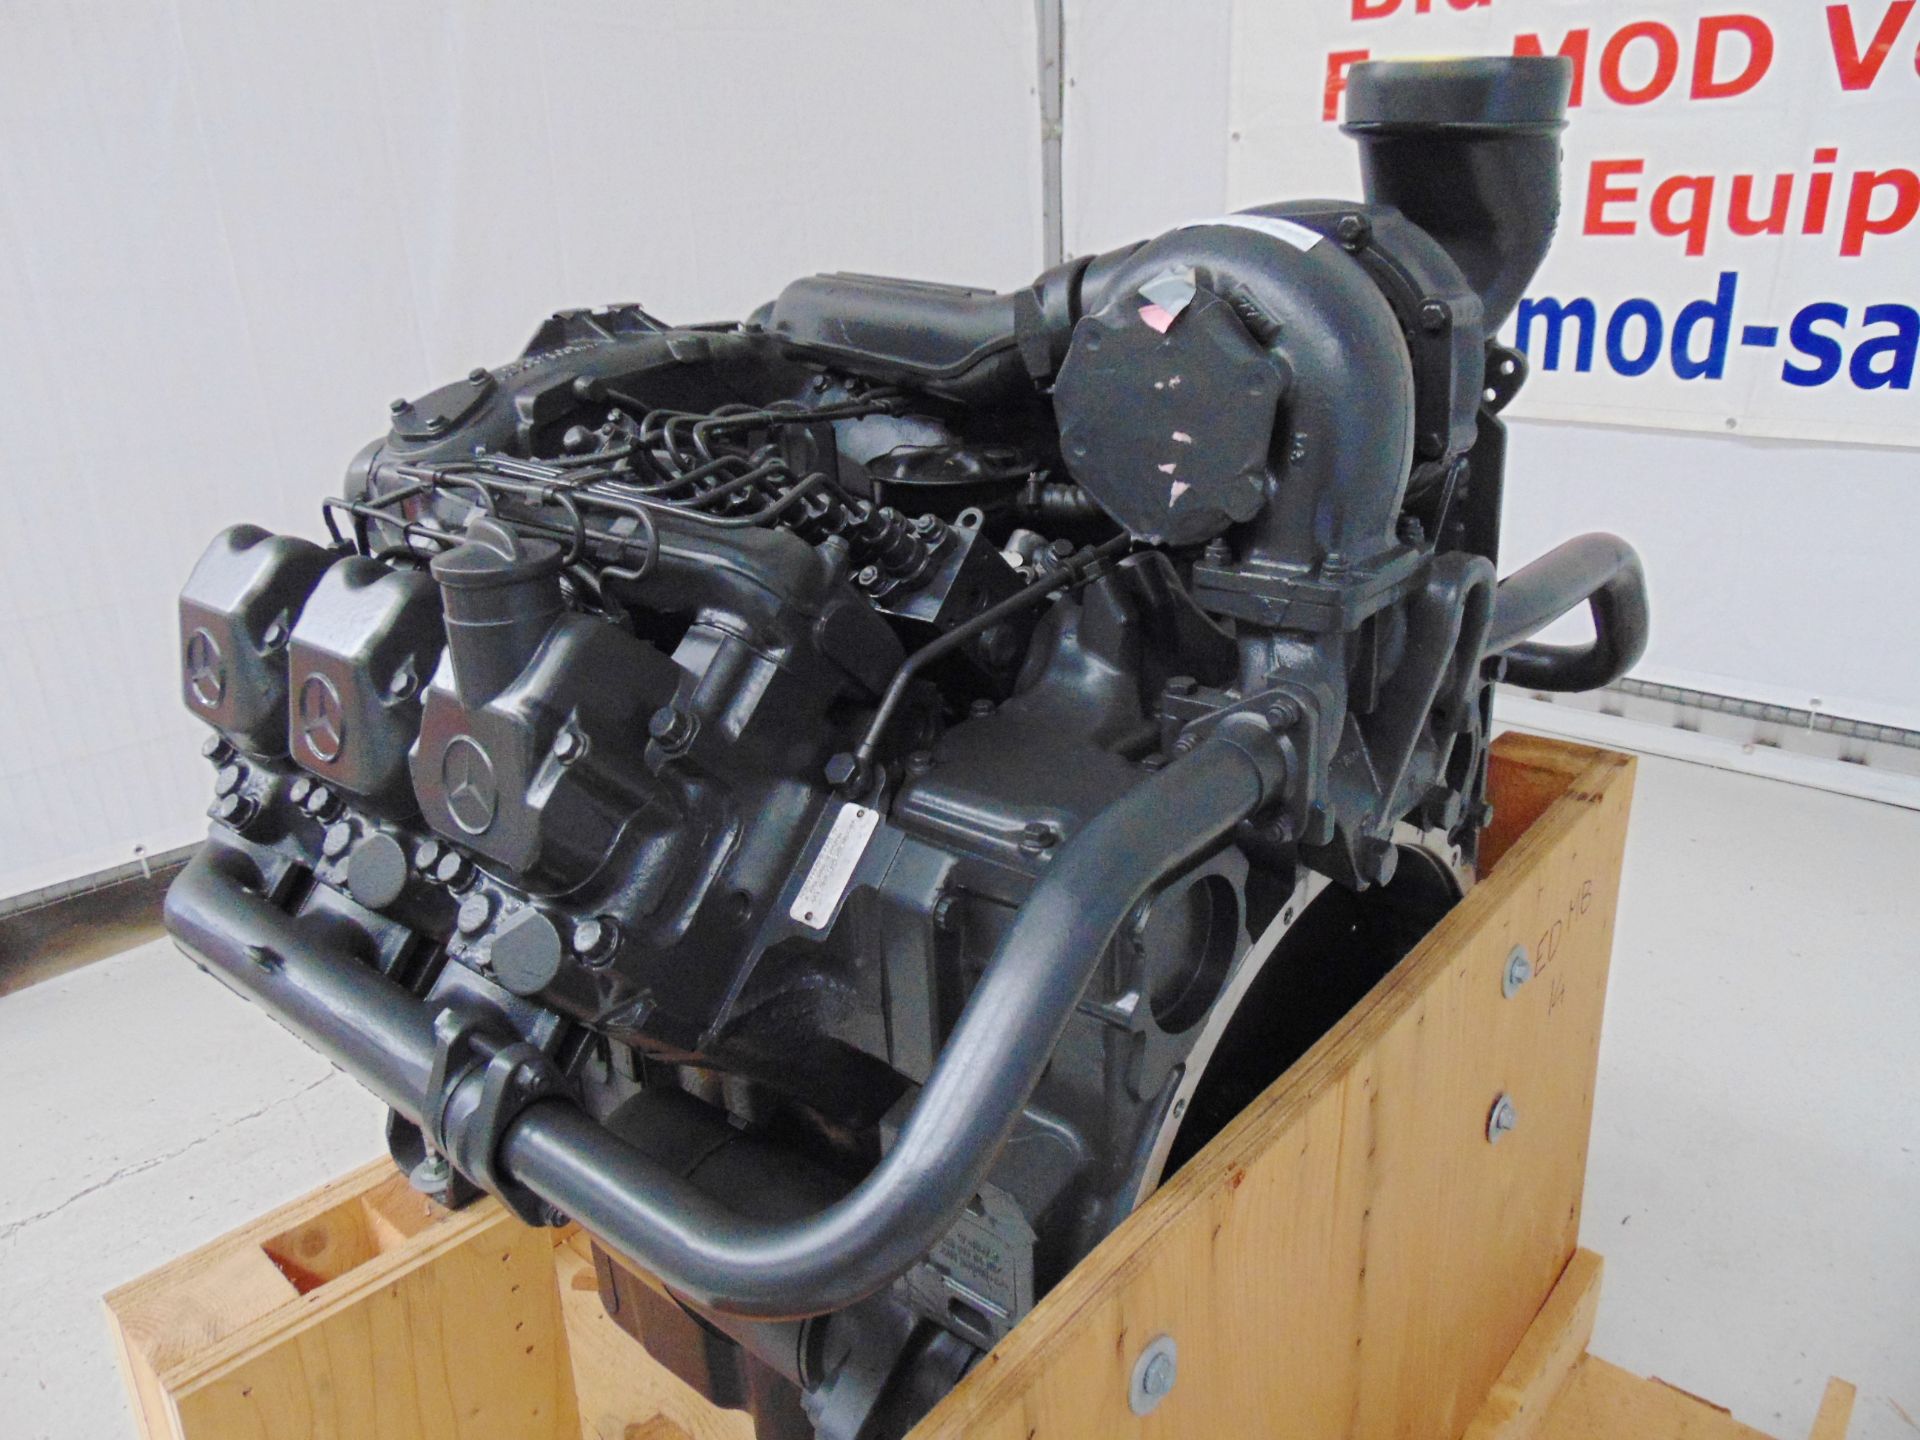 Factory Reconditioned Mercedes-Benz OM441 V6 Turbo Diesel Engine - Image 12 of 17